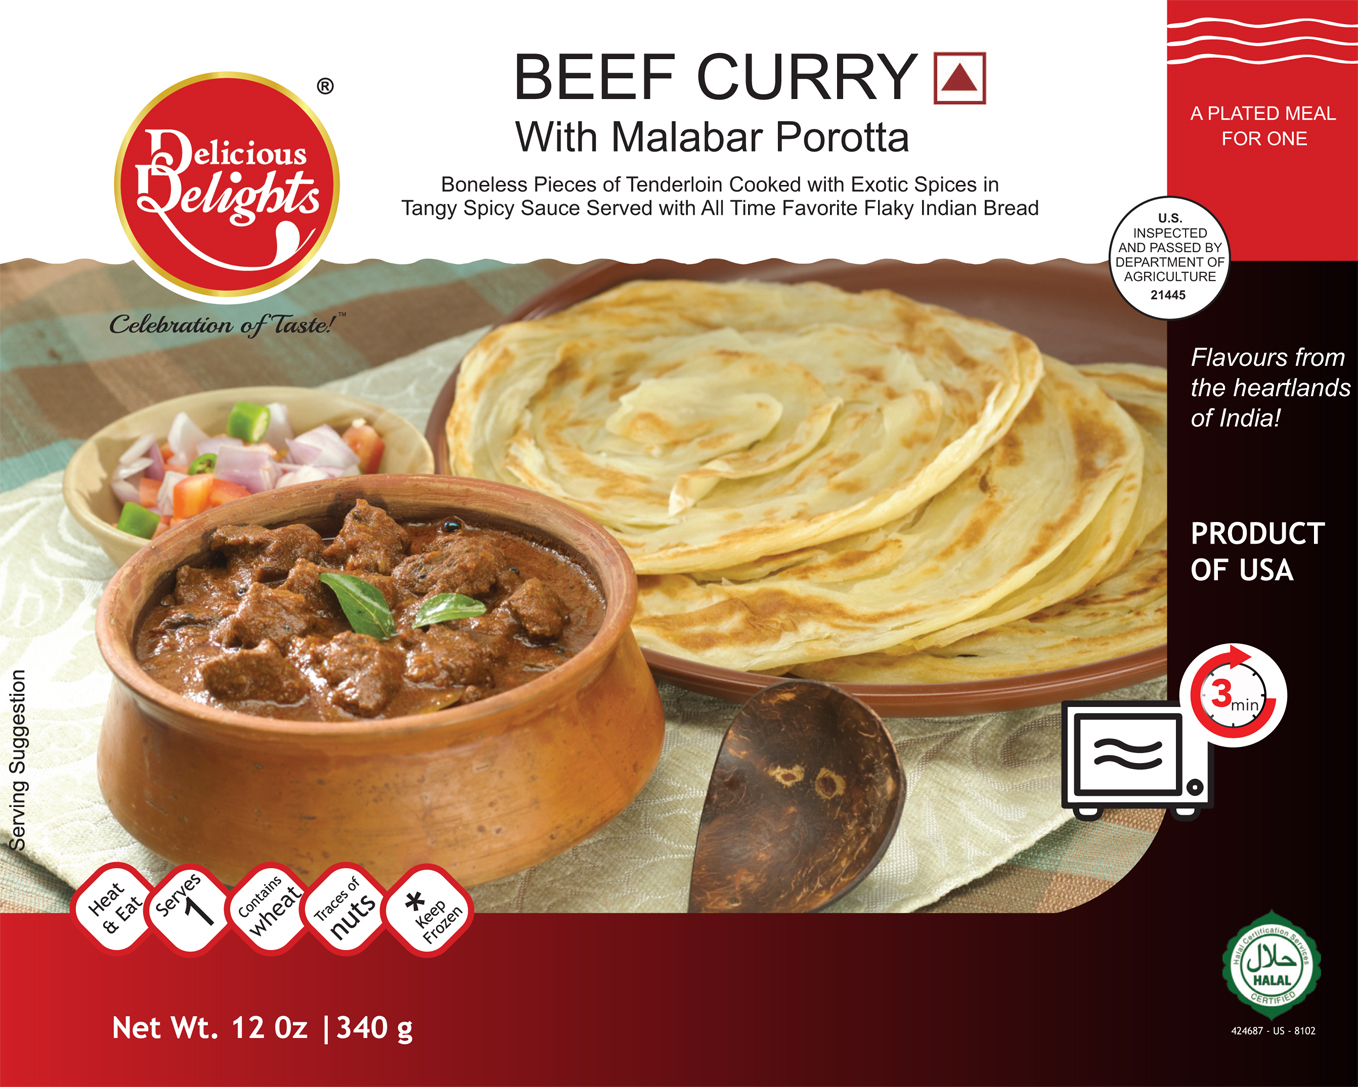 Delicious Delights Beef Curry with Malabar Porotta